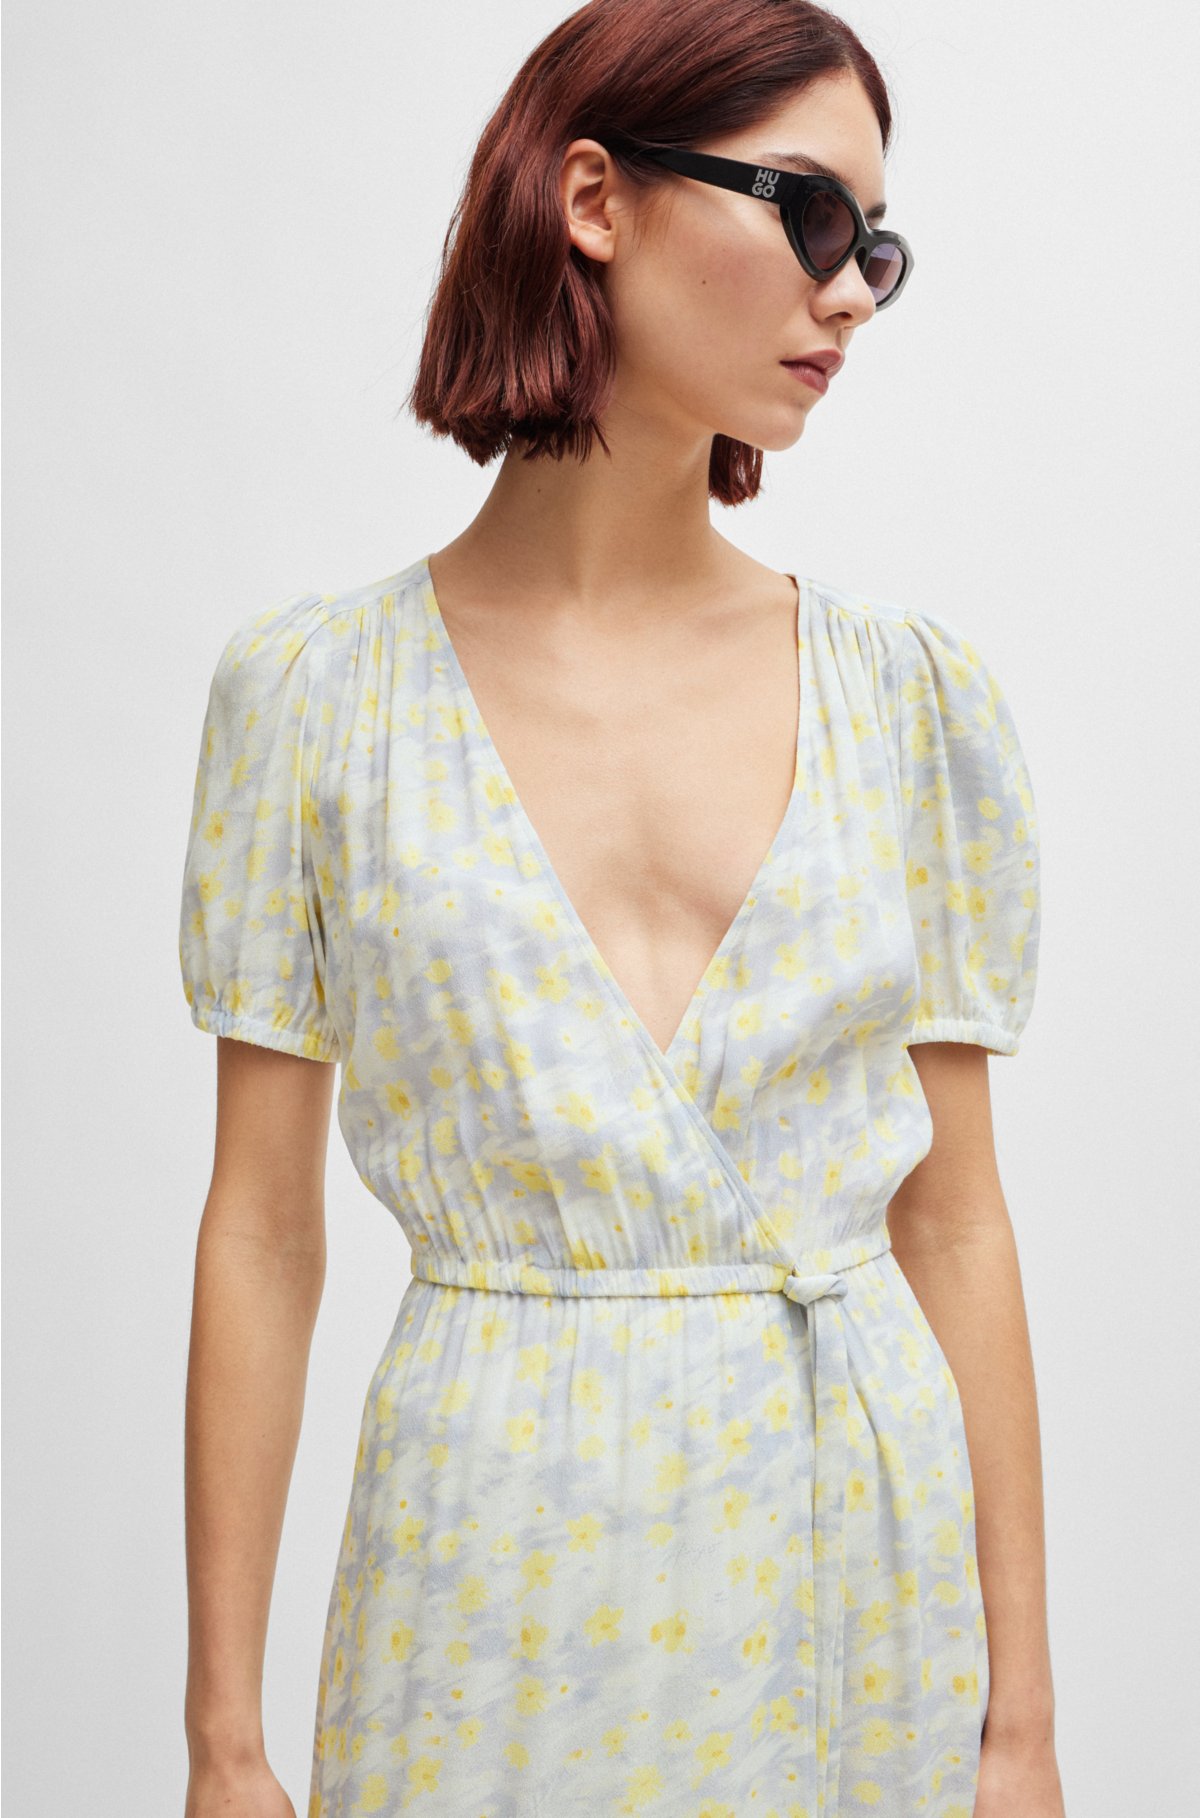 Wrap-front dress in printed fabric, Patterned